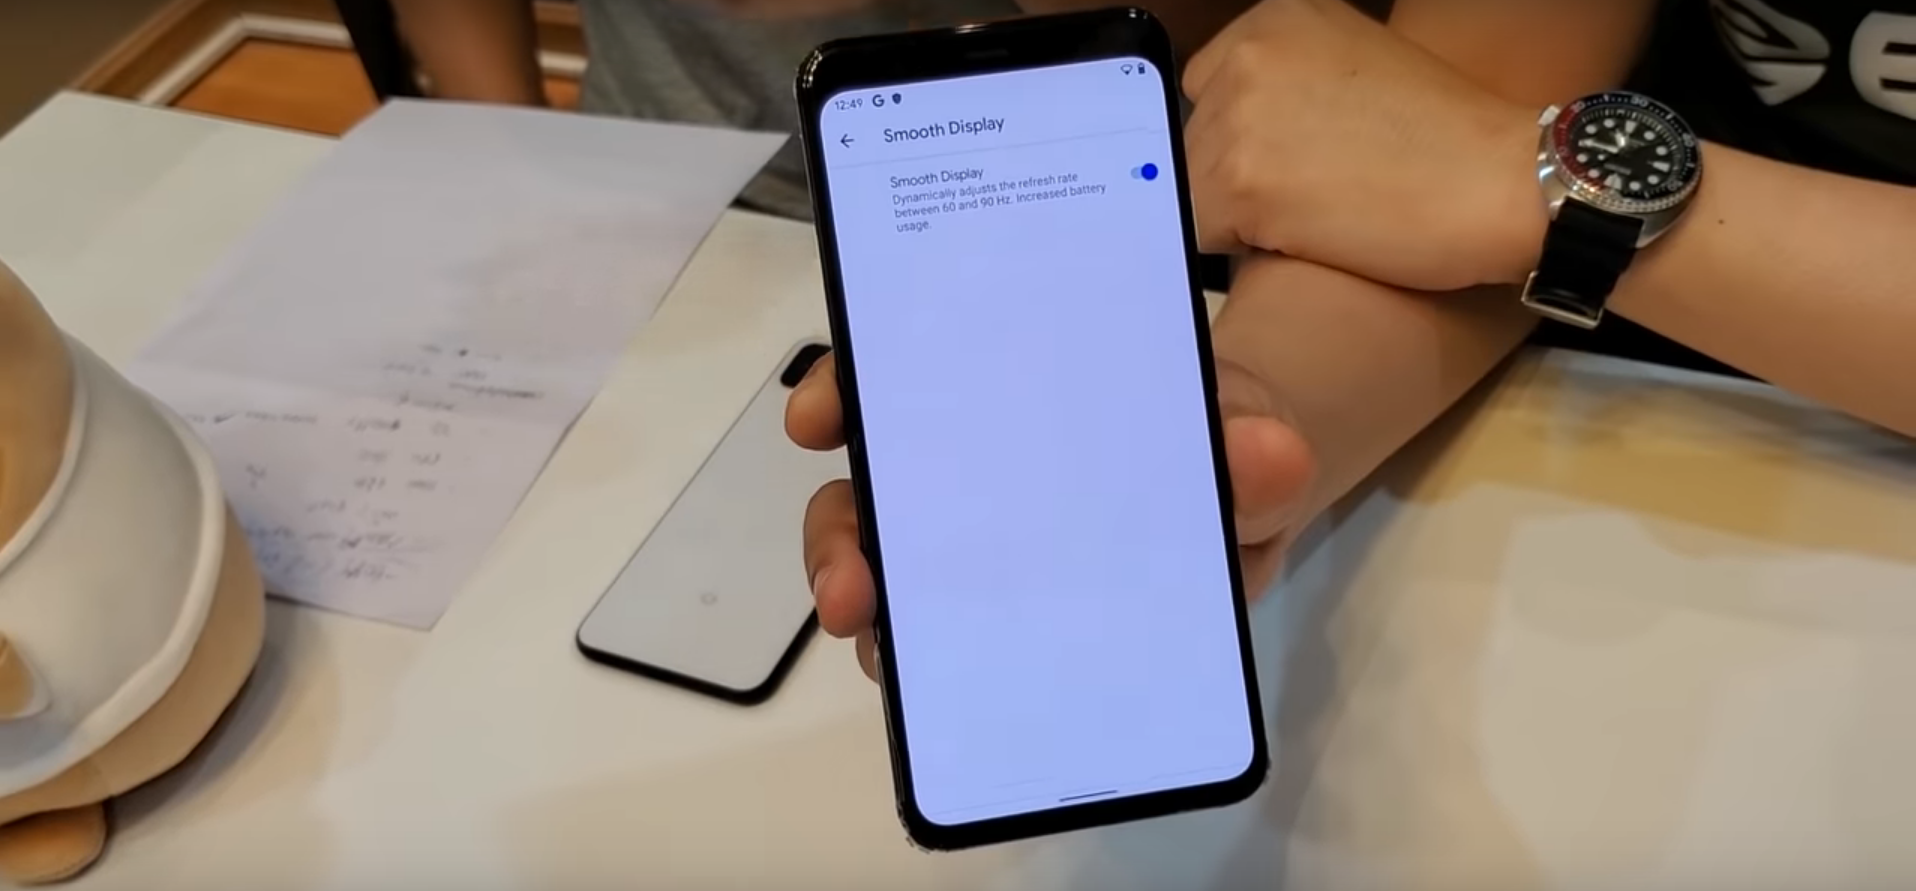 Hands-on Video confirms 90Hz Display on the Google Pixel 4